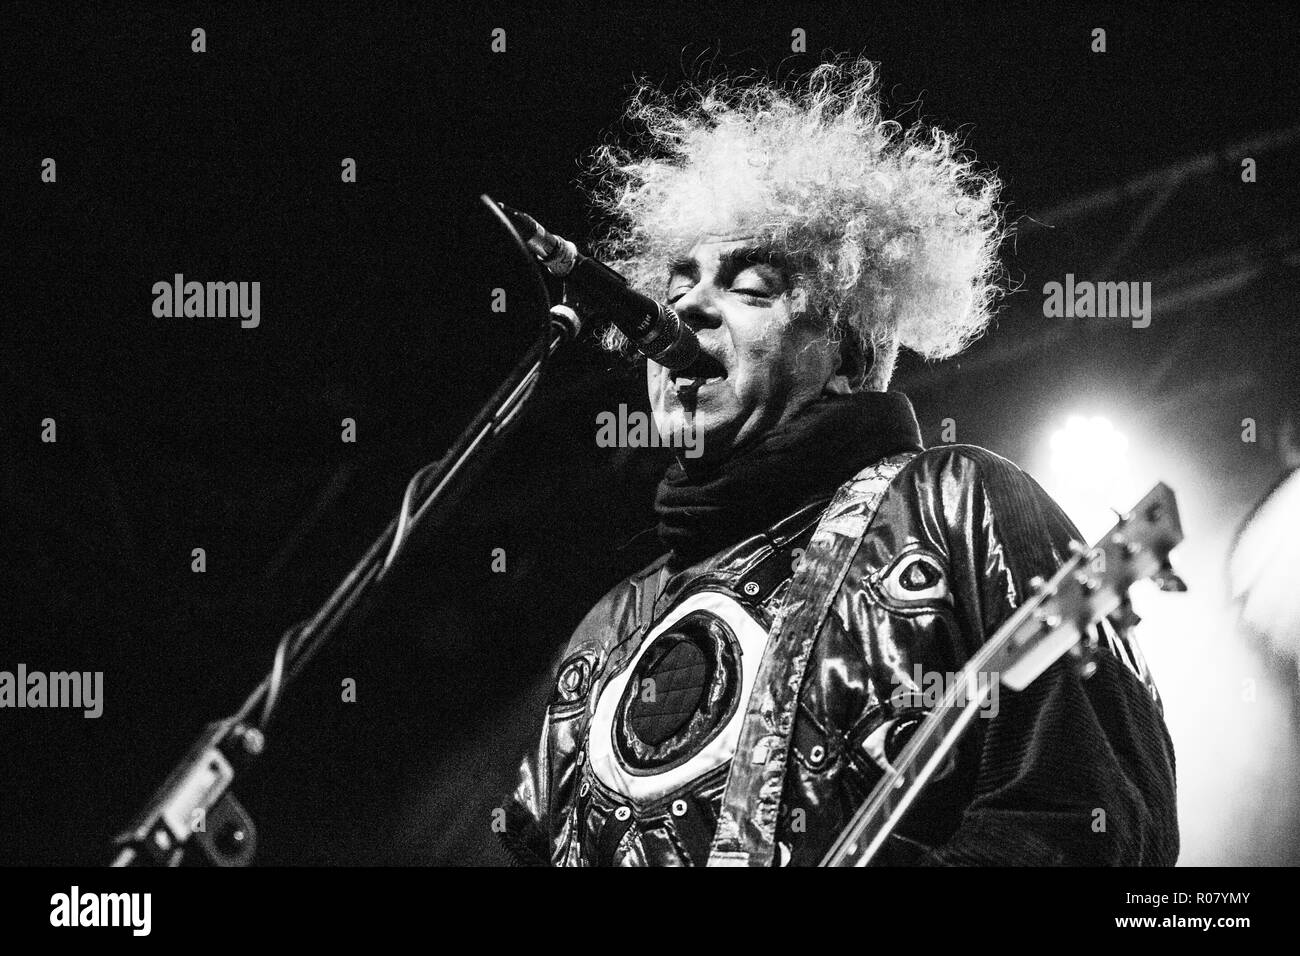 The Melvins (guitarist King Buzzo) 26th October 2018 - Leeds Stylus Stock Photo